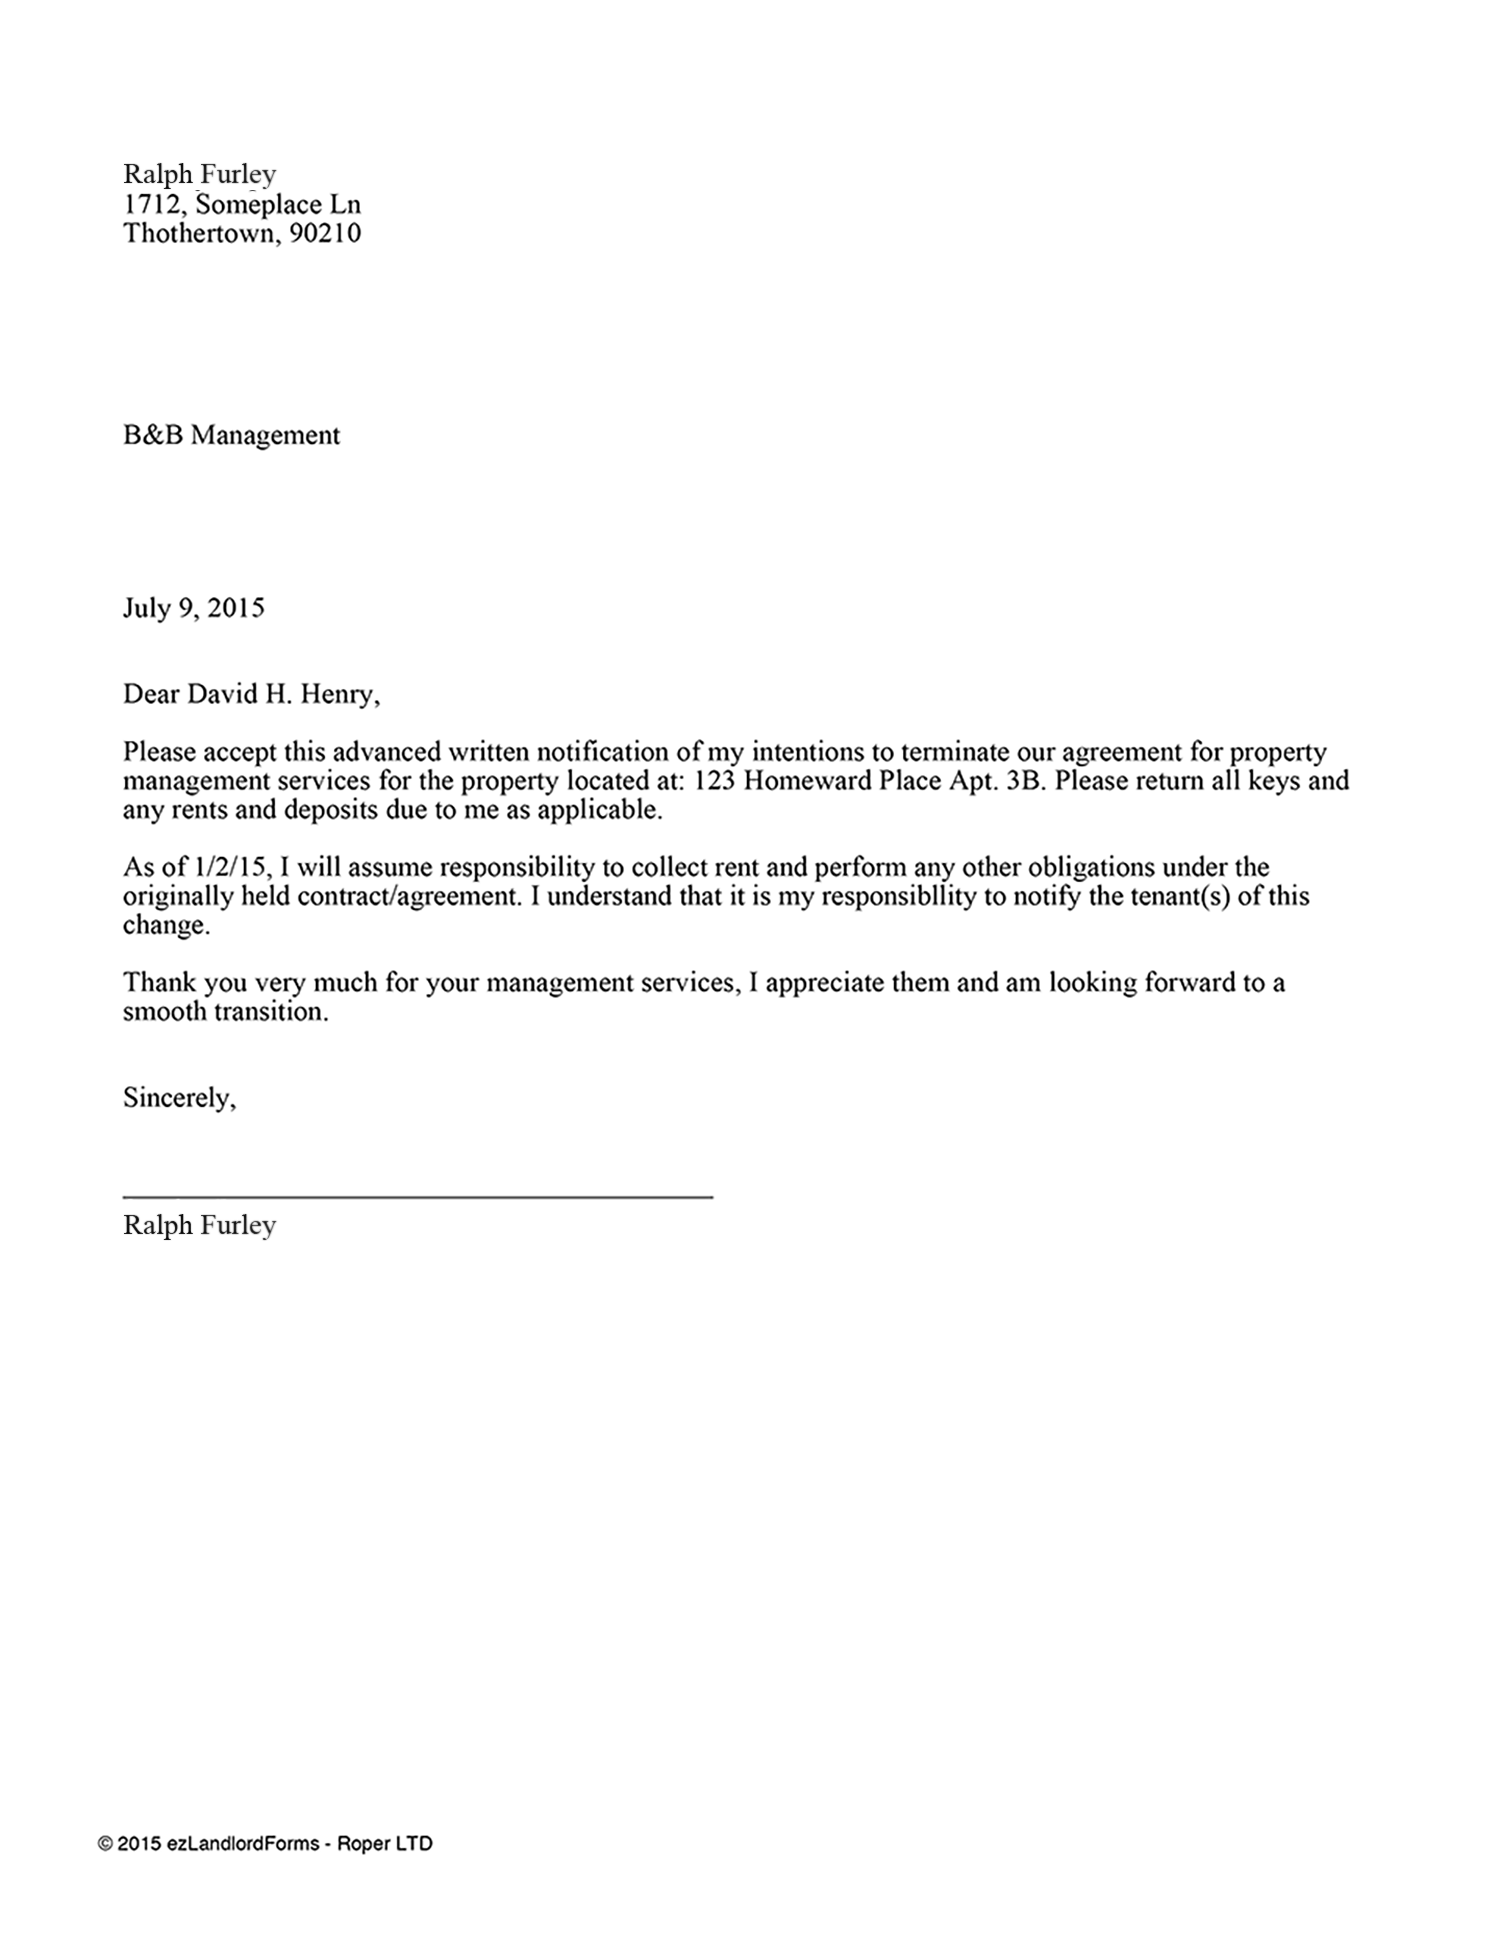 Terminating A Contract Letter from www.ezlandlordforms.com